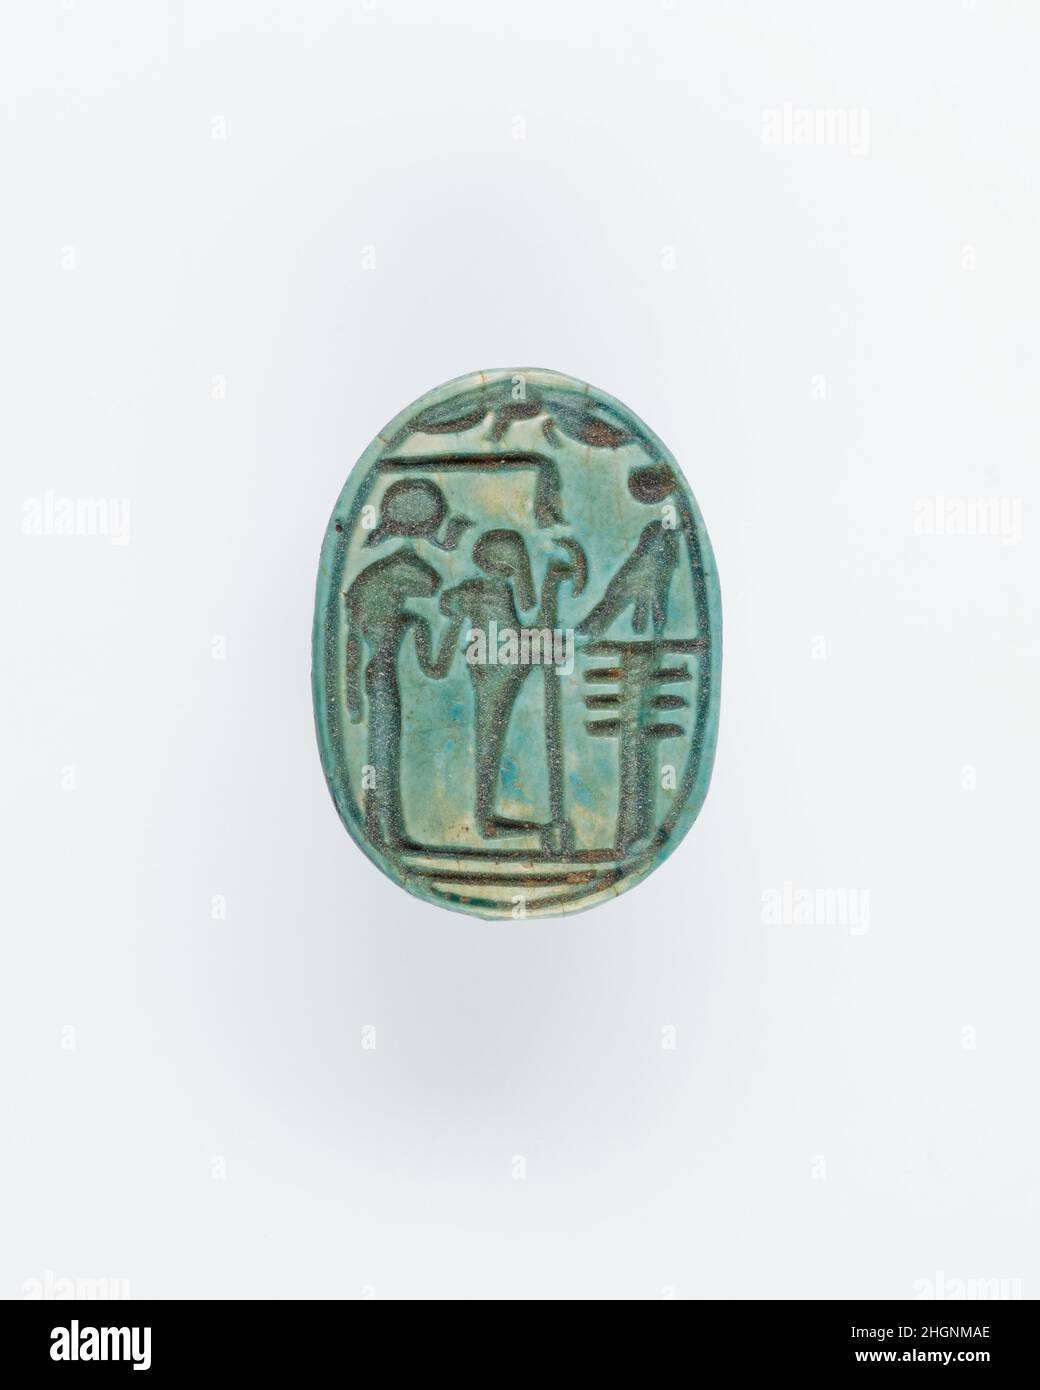 Scarab With an Image of the Gods Ptah and Sakhmet ca. 1295–1186 B.C. New Kingdom, Ramesside The scarab was shaped like a dung beetle, 'scarabaeus sacer,' which is also the source of its modern name. The dung beetle was 'kheperer' in ancient Egyptian. Having watched the small creatures push huge balls of dung, the ancient Egyptians compared the sun being pushed into the sky at dawn to the beetle, and they referred to the rising sun as 'Kheperi.' The word for 'to become' or 'come into being' was 'kheper,' and the beetle hieroglyph was used to spell all of these words. As such, the scarab became Stock Photo